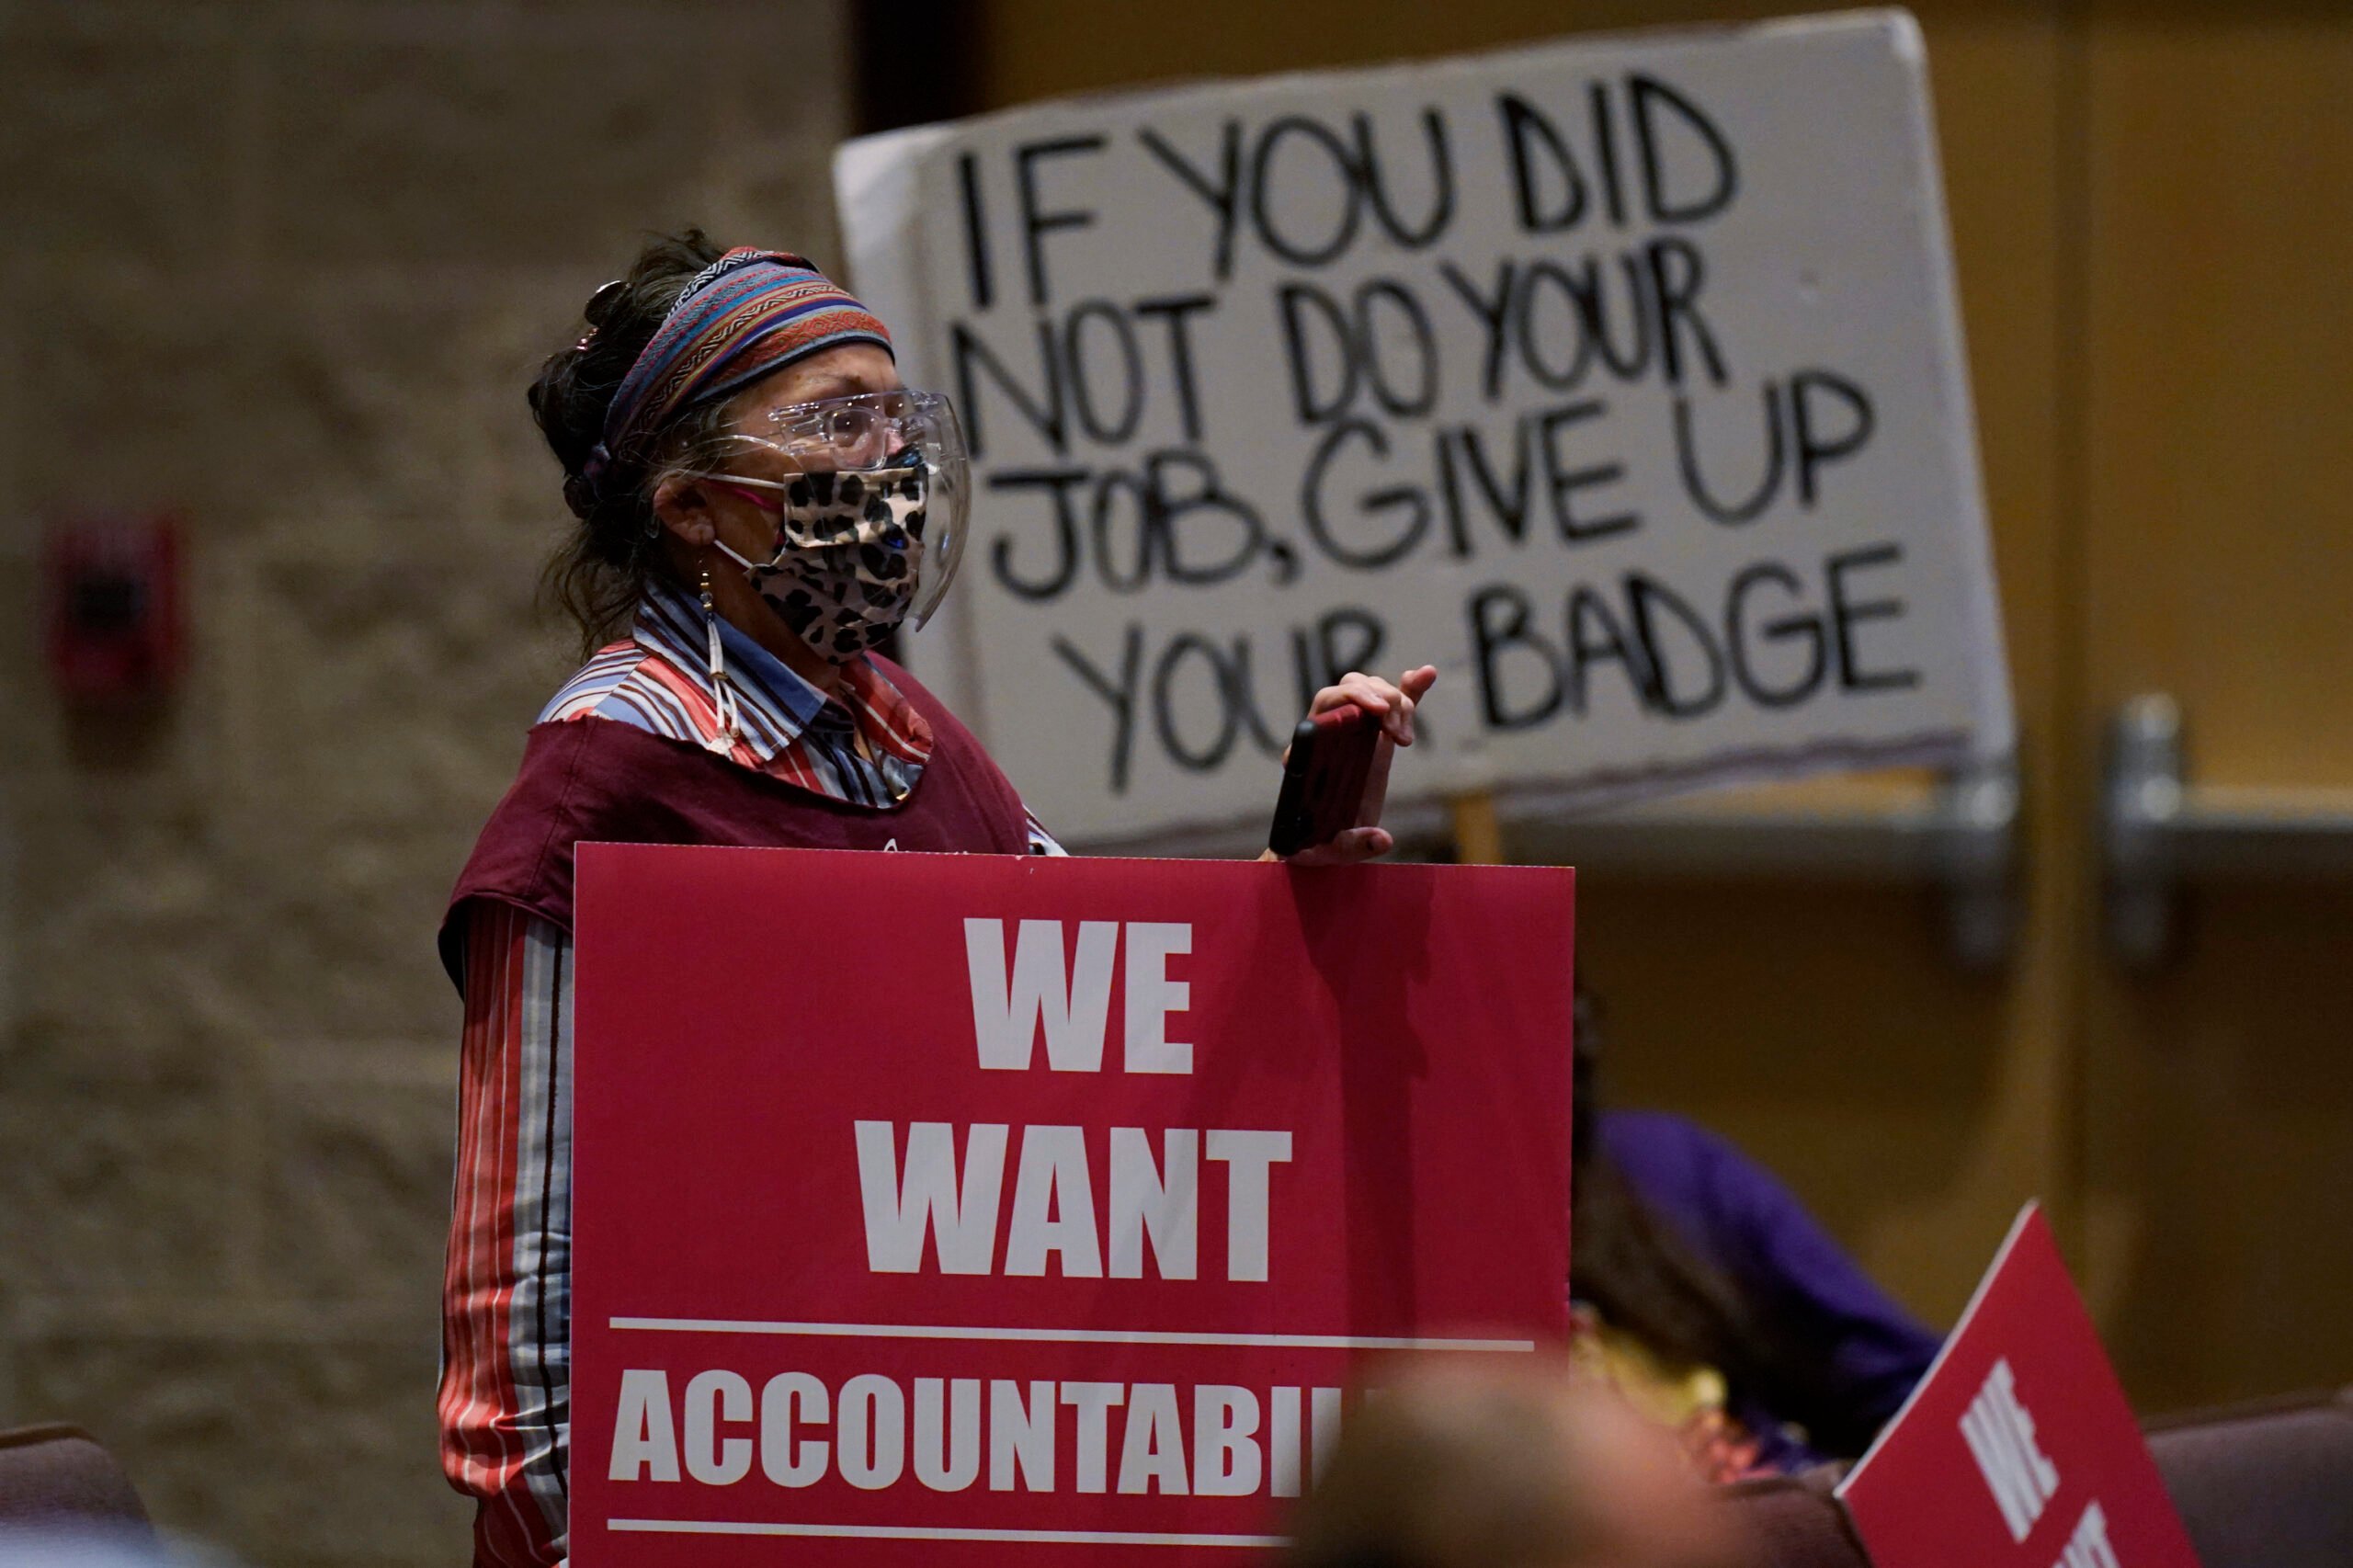 A protester holds a sign reading "If you did not do your job, give up your badge" at a meeting of the Board of Trustees of the Uvalde Consolidated Independent School District. A banner draped over the dais reads, "We want accountability."